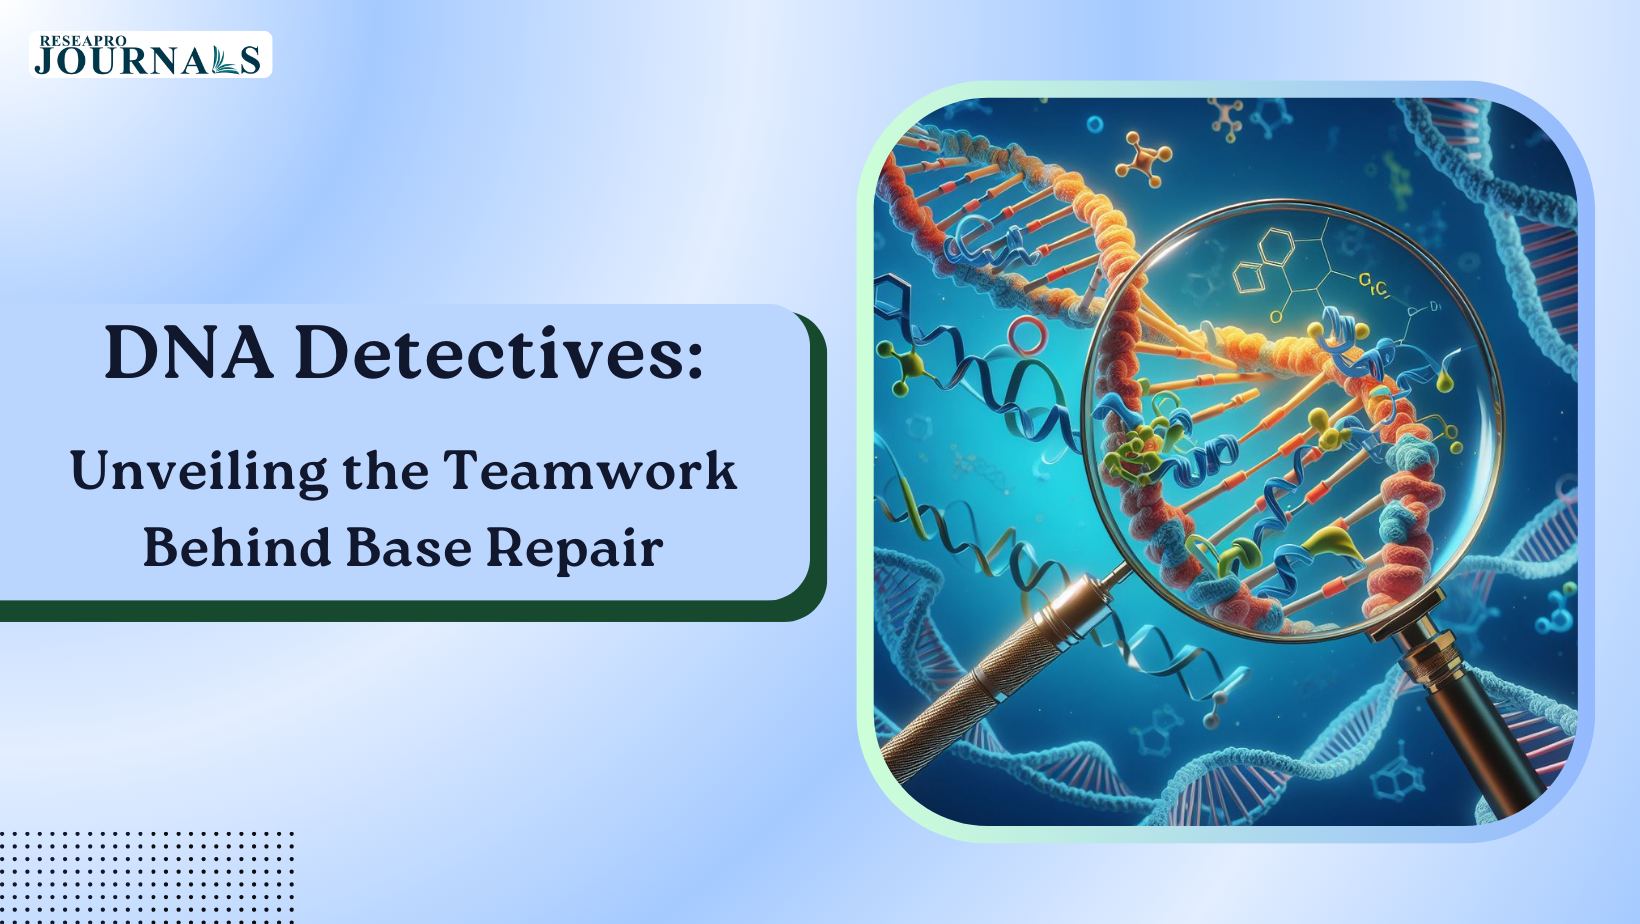 DNA Detectives: Unveiling the Teamwork Behind Base Repair